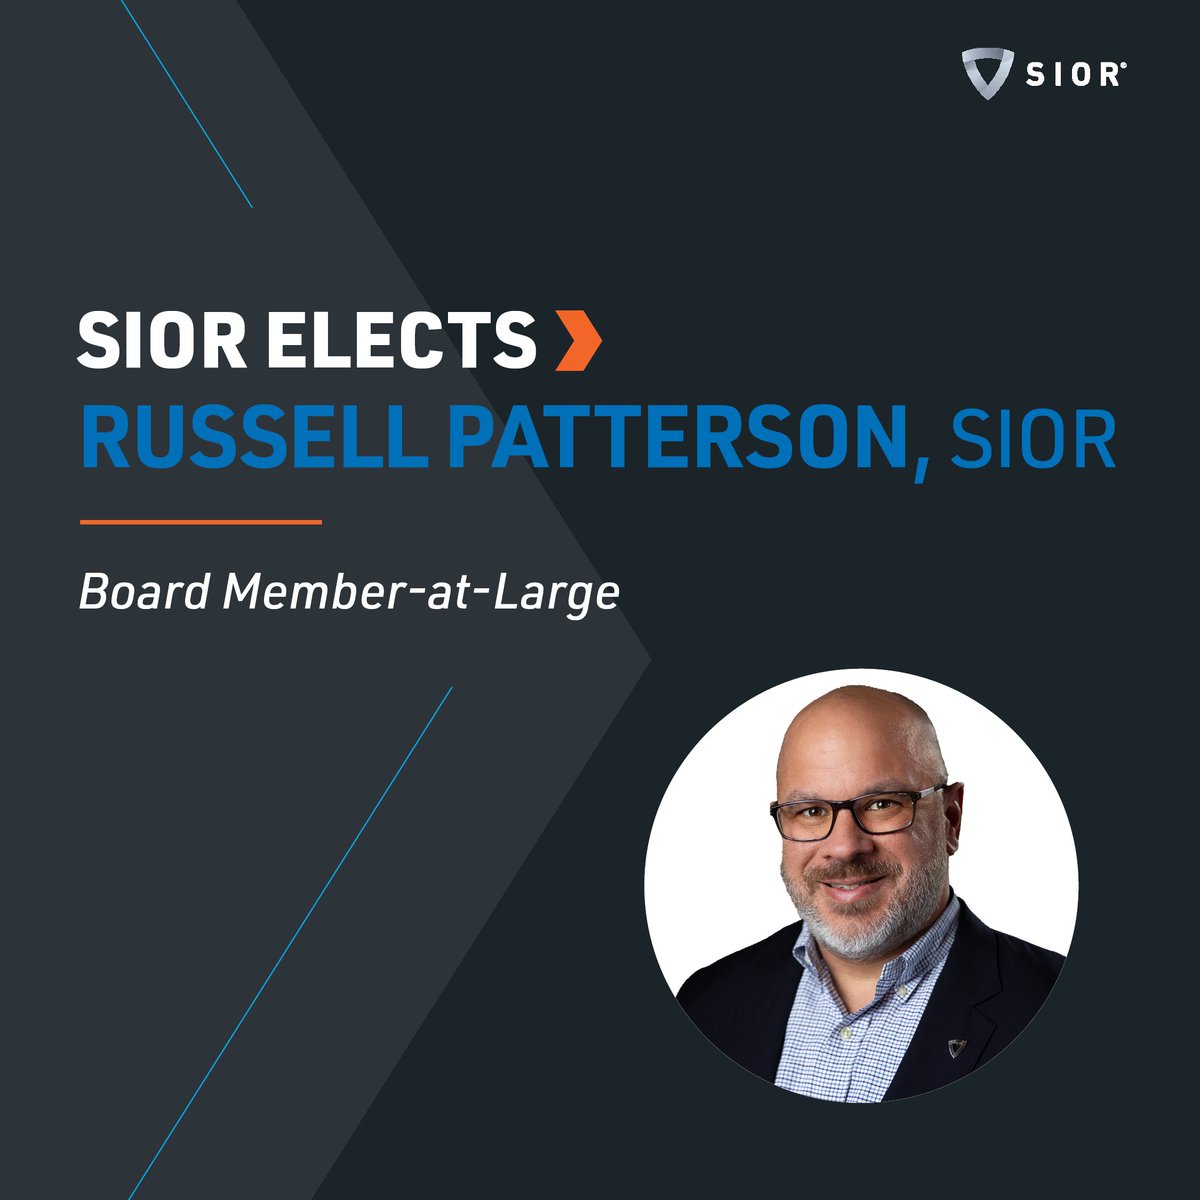 A big congratulations to Russell Patterson, SIOR, (@PCPGtyler) for being elected to serve as a Member-at-Large for the SIOR Board of Directors. Tenacious, hard-working, & friendly to boot, we know Russell will elevate the organization to new heights when he assumes his new role.